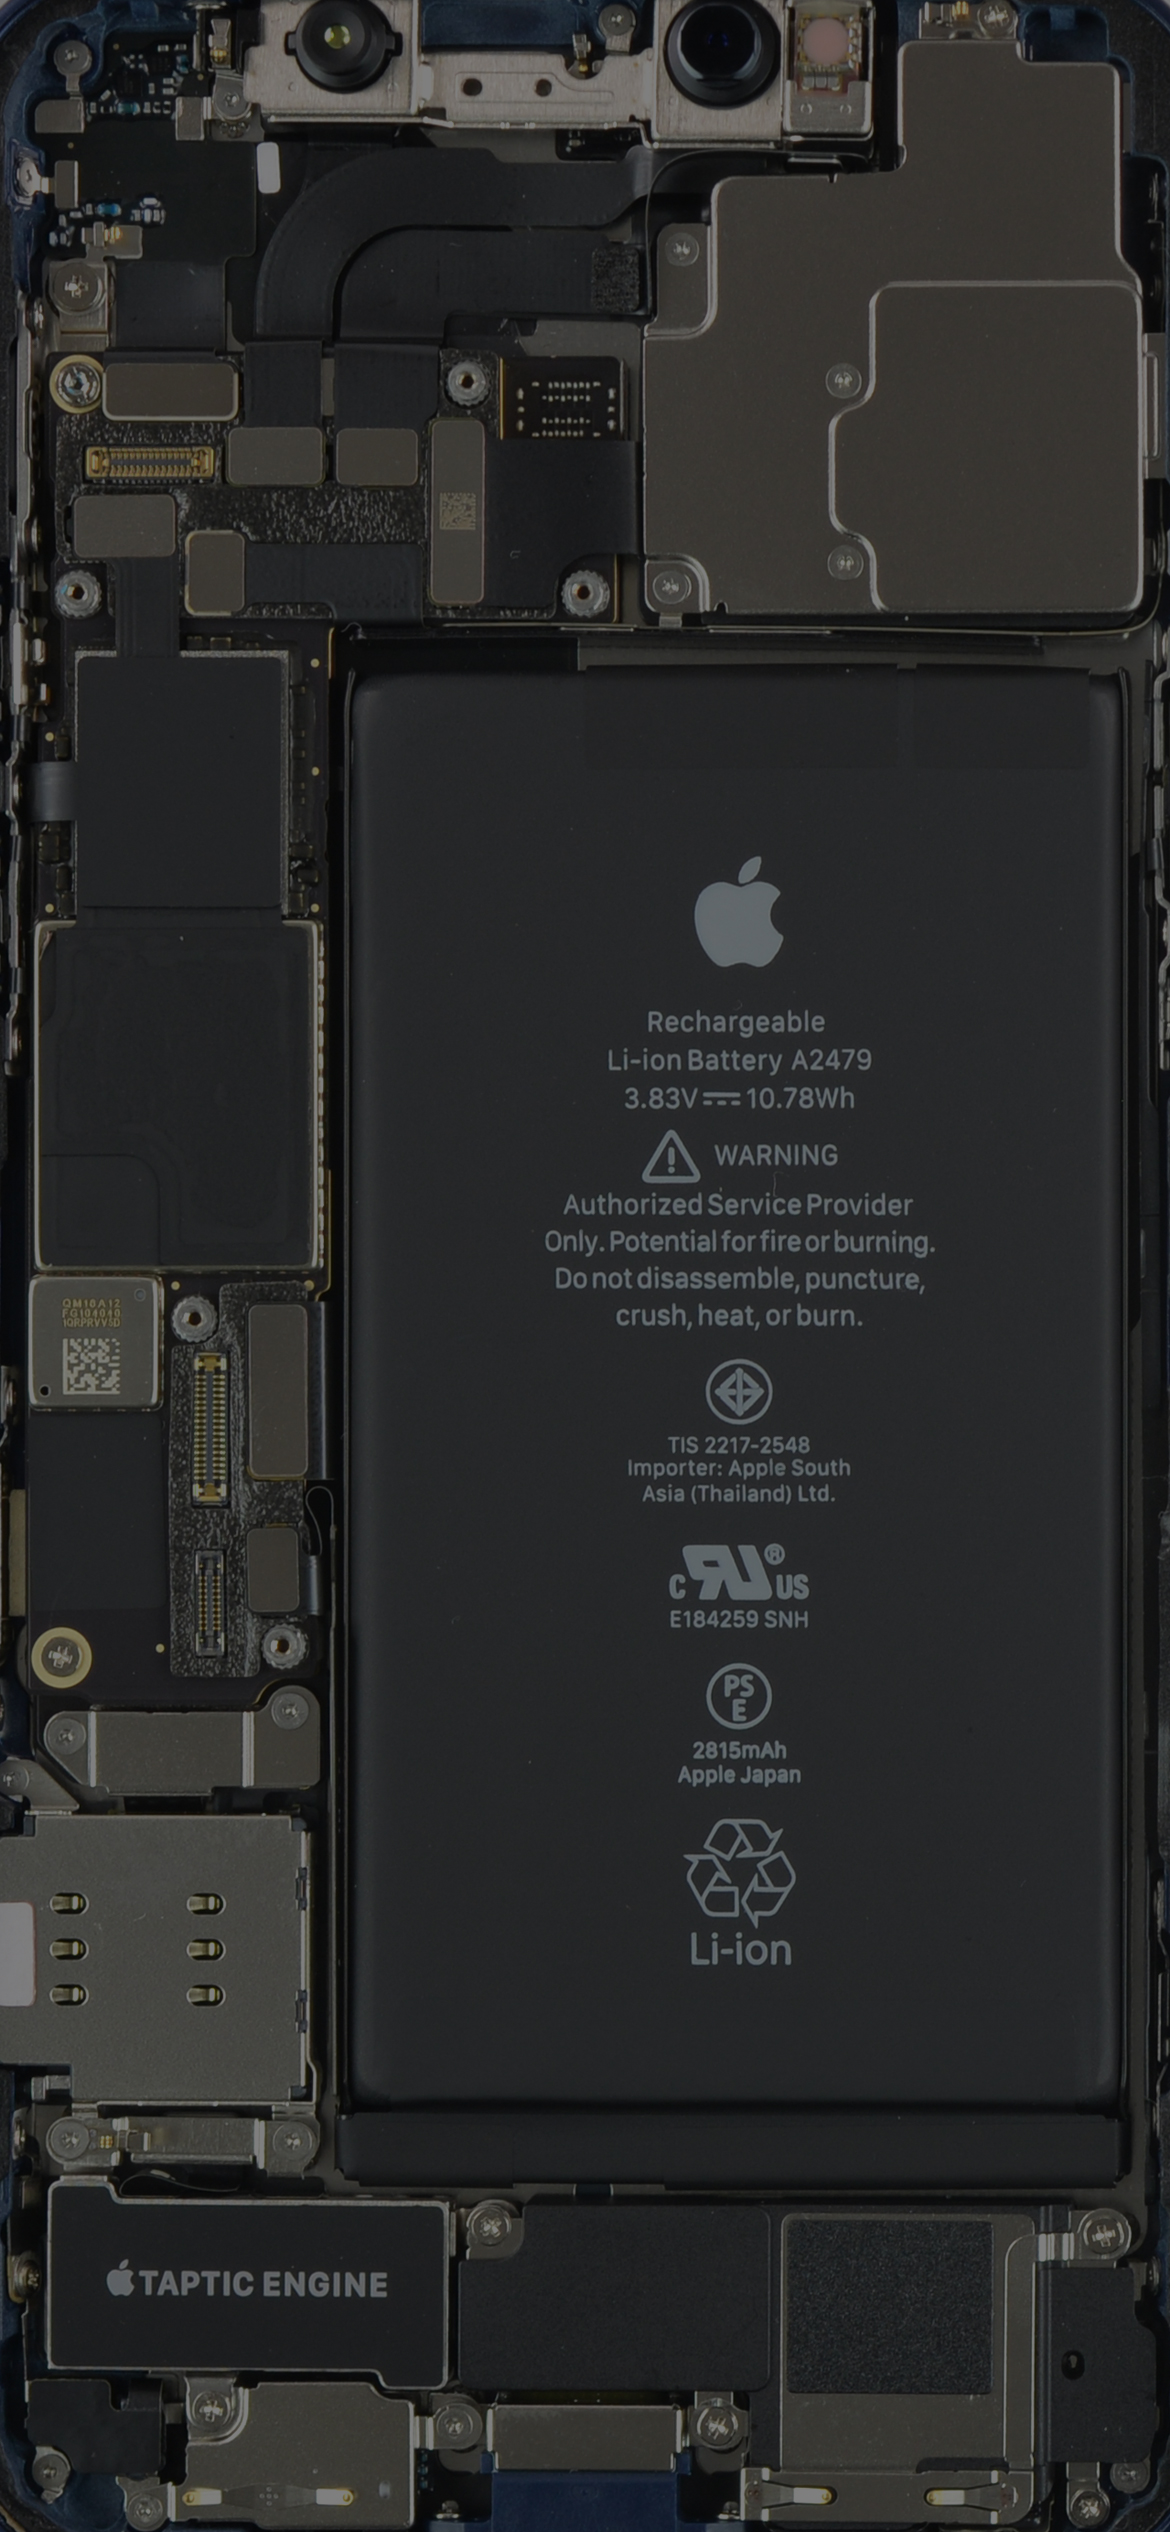 Get a look inside your iPhone 12 with iFixit’s new X-ray and internal